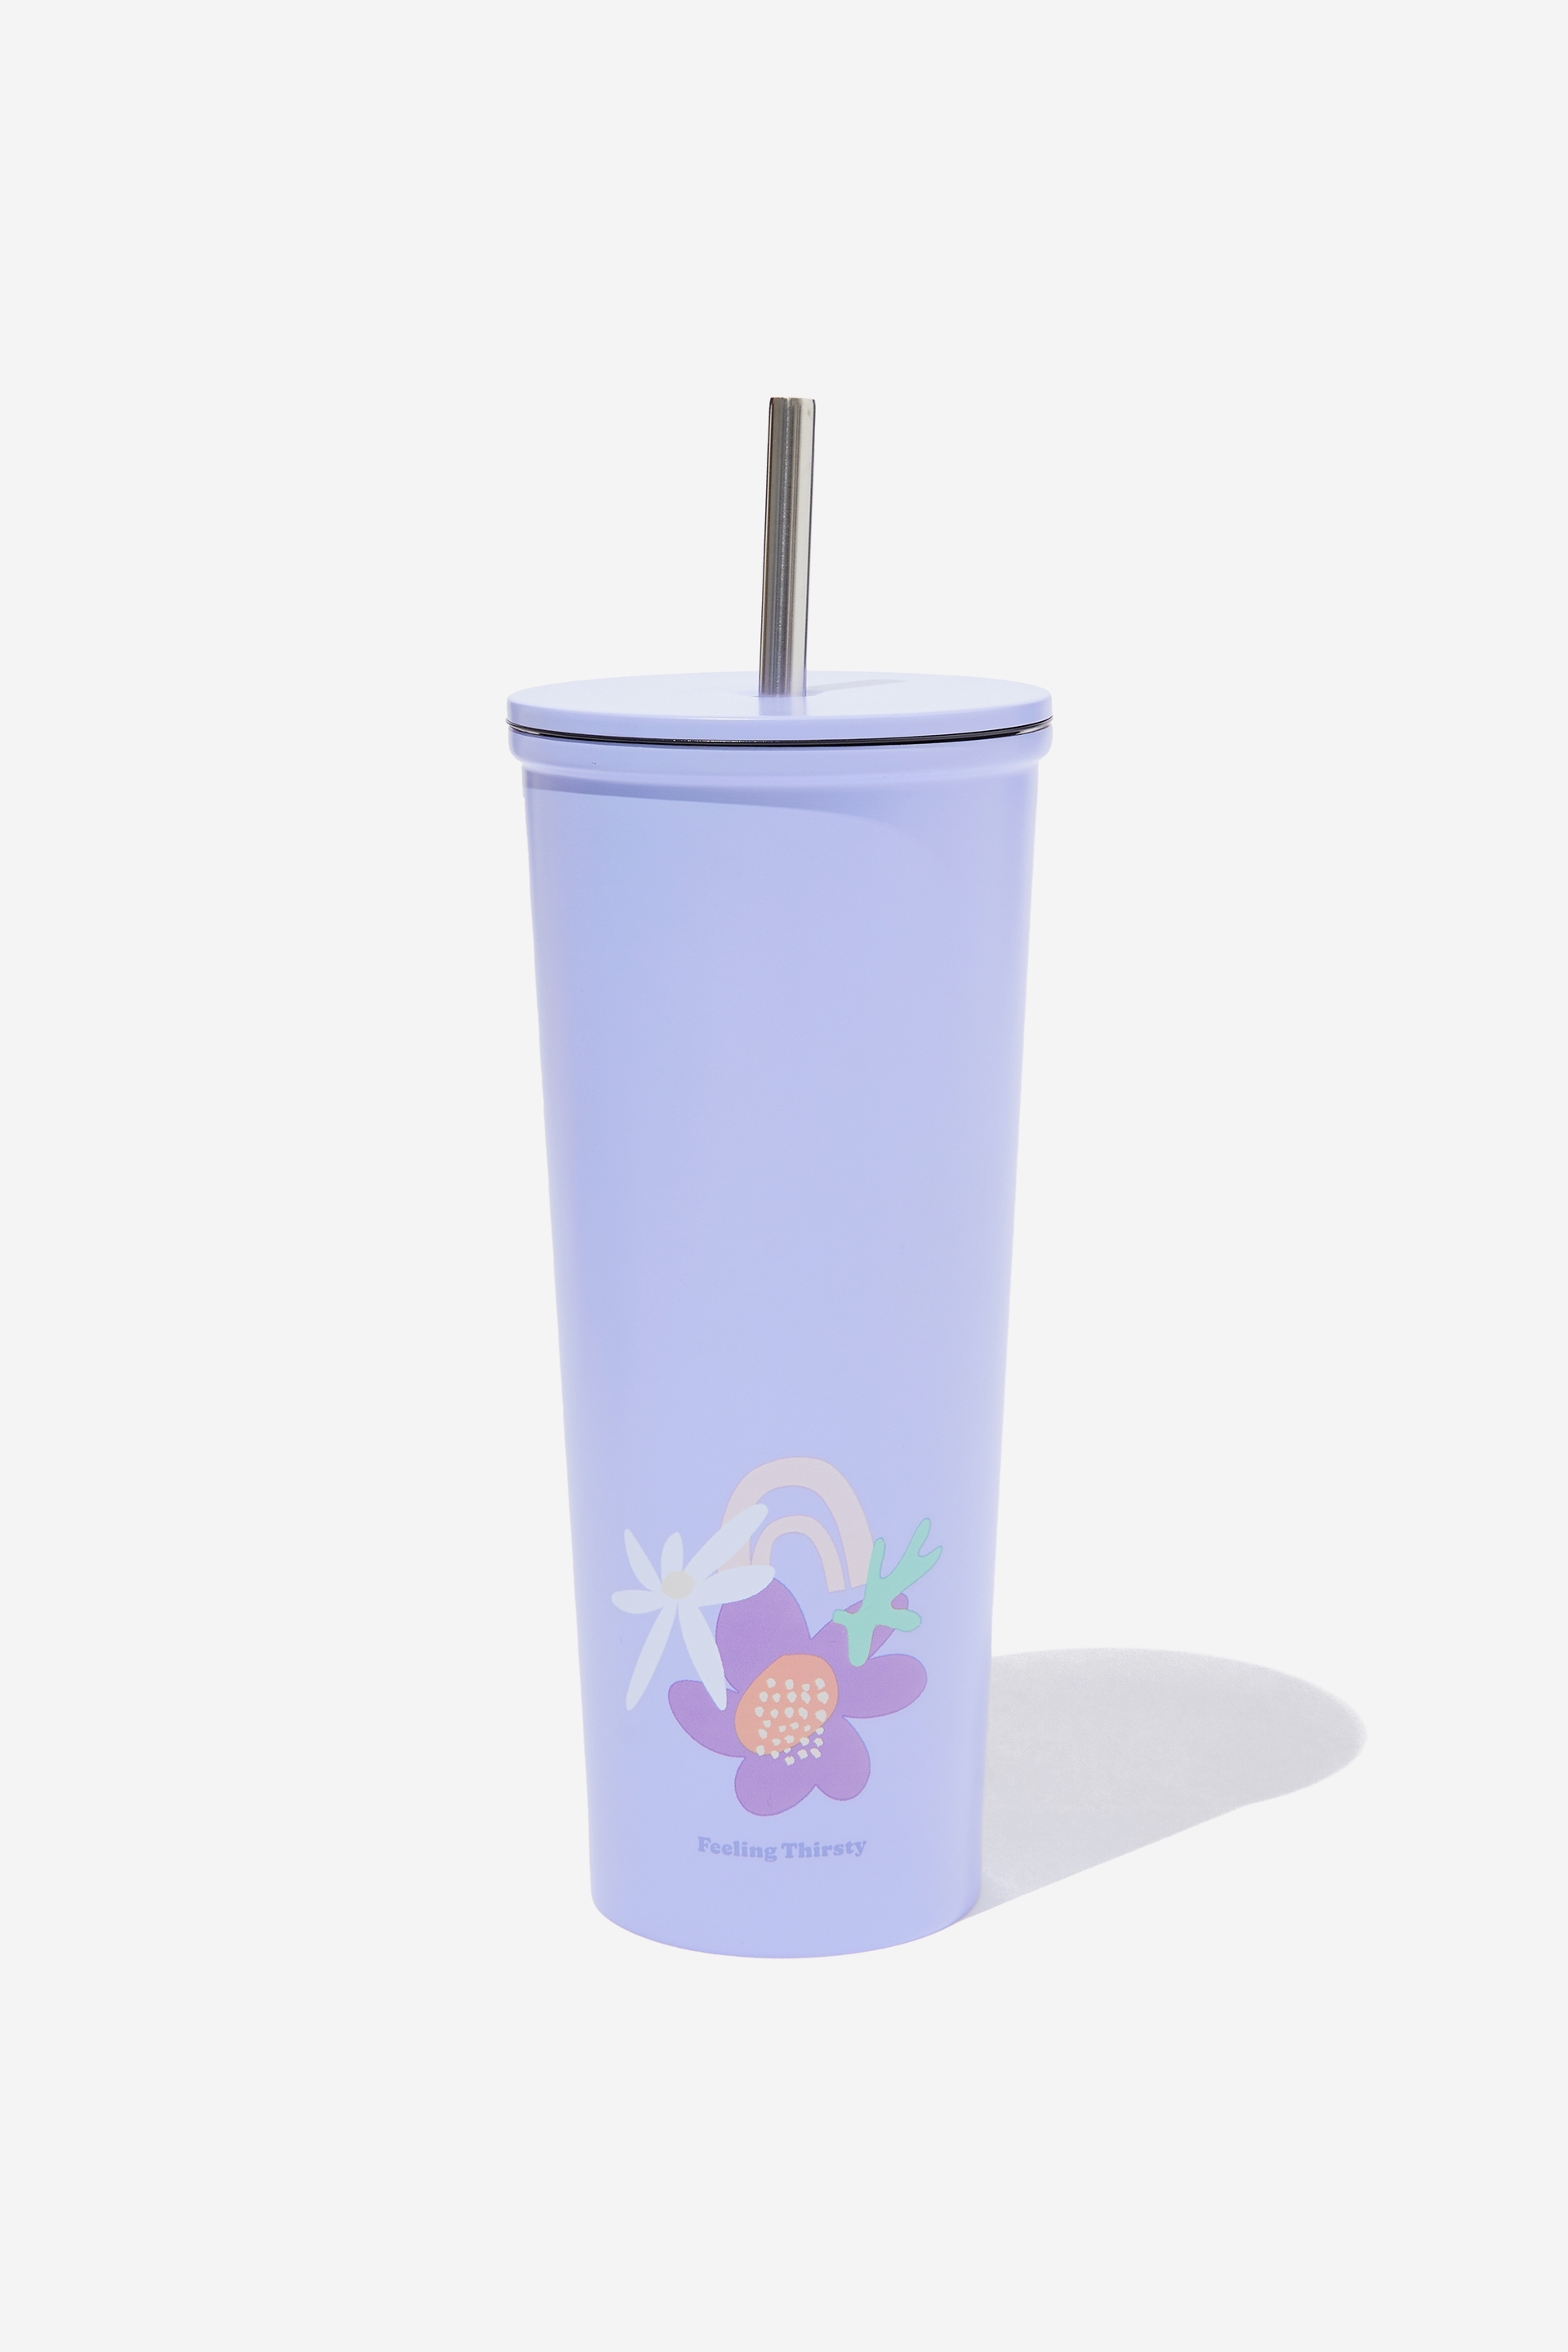 Typo - Metal Smoothie Cup - Feeling thirsty lilac